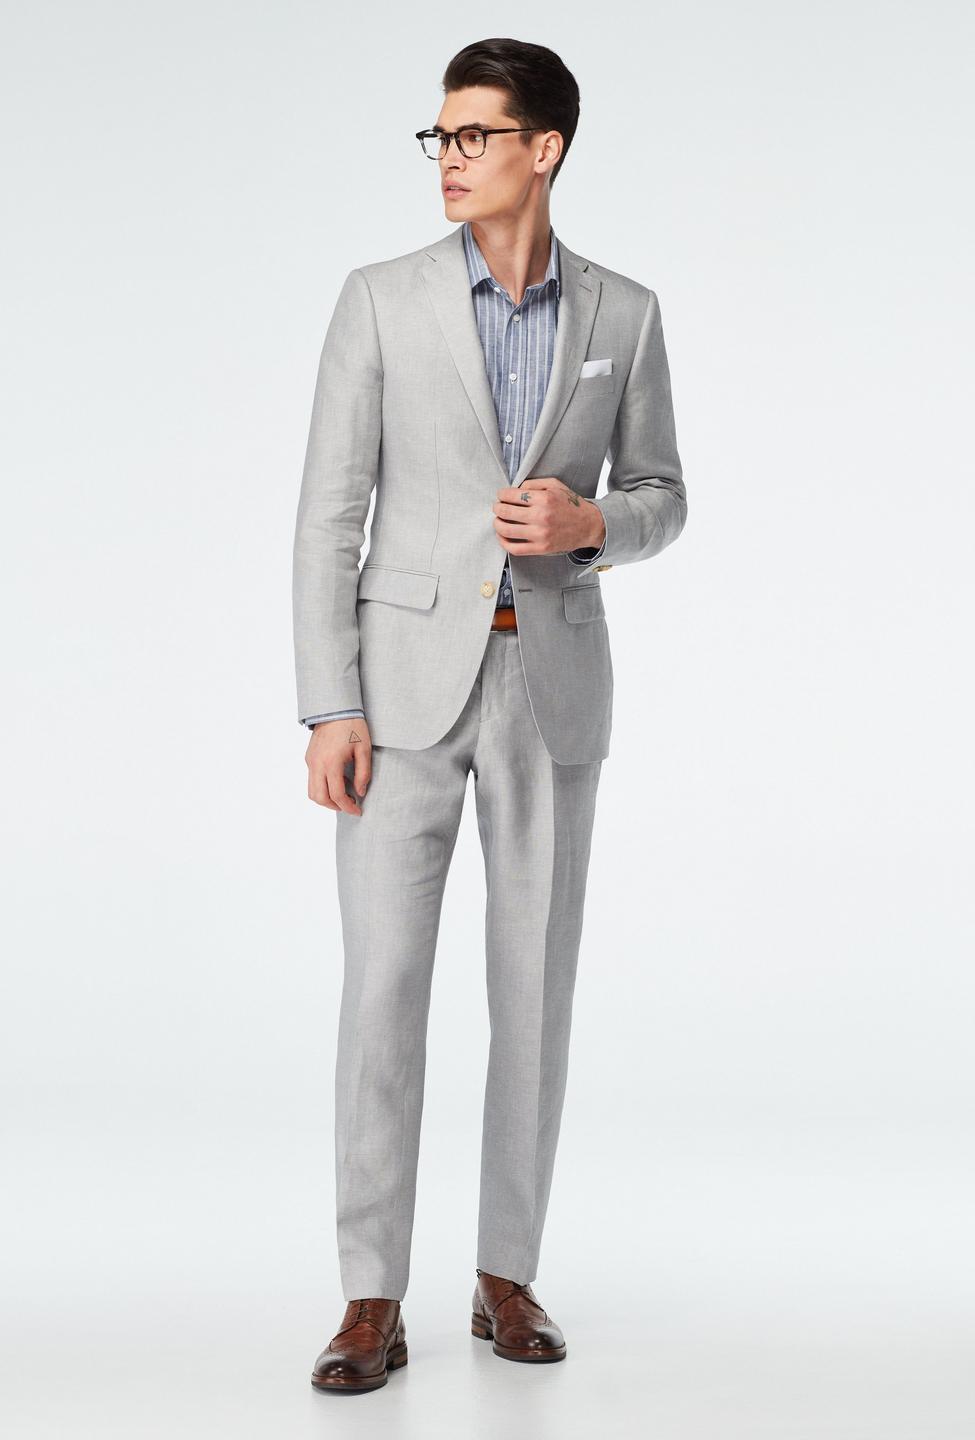 Gray suit - Sailsbury Solid Design from Seasonal Indochino Collection